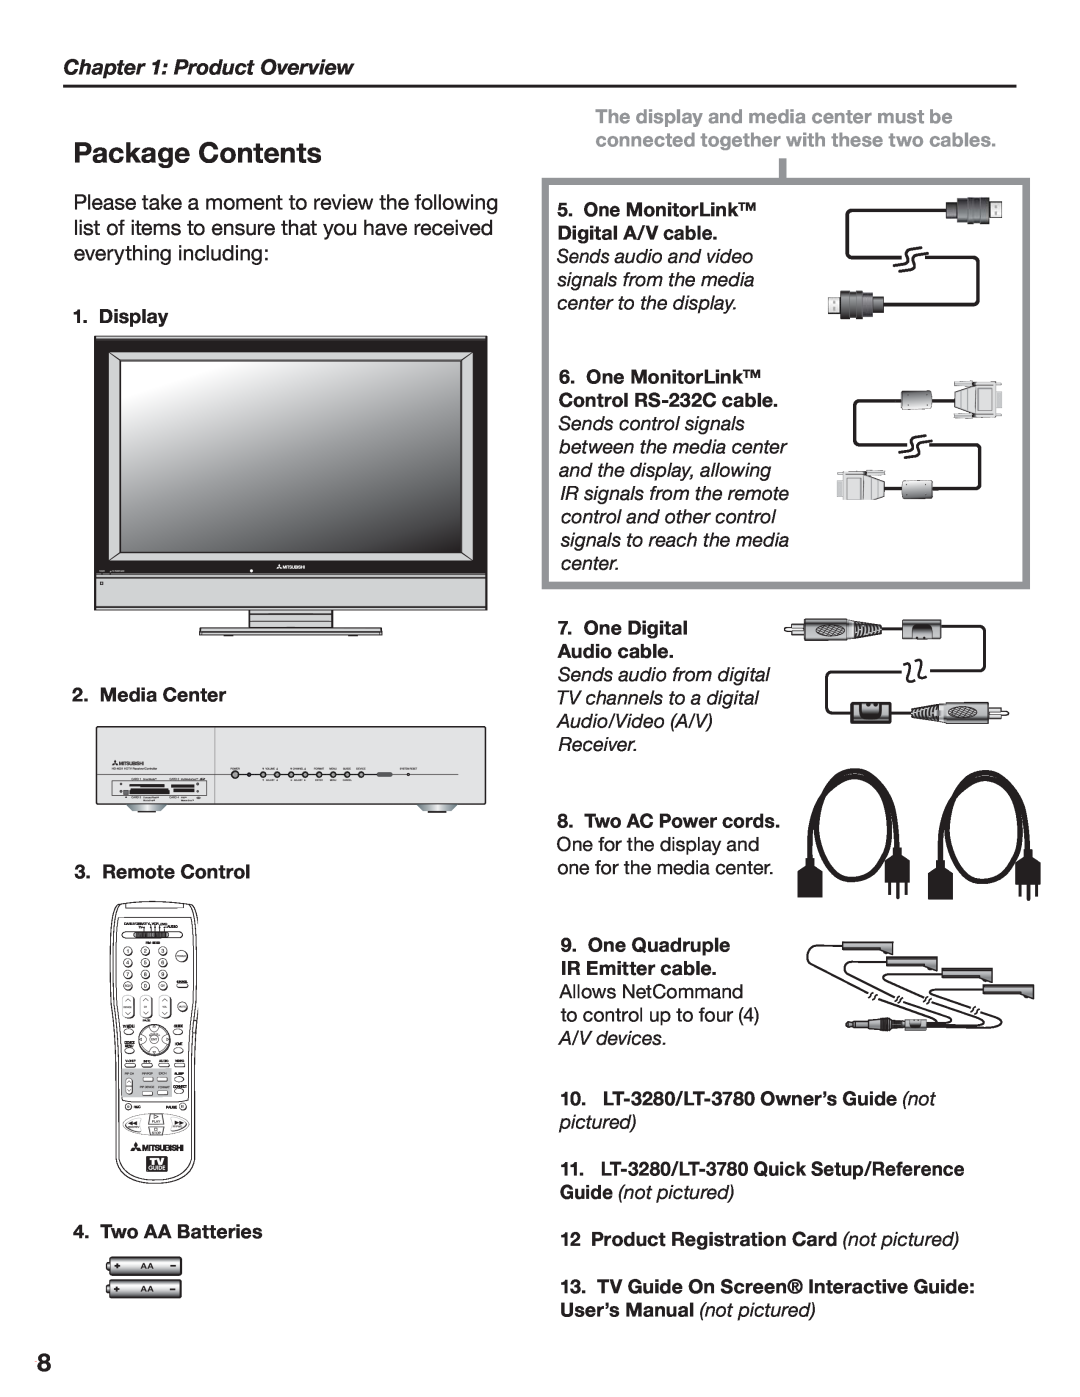 Mitsubishi Electronics LT-3280, LT-3780 manual Package Contents, Product Overview, Display 2. Media Center 3. Remote Control 